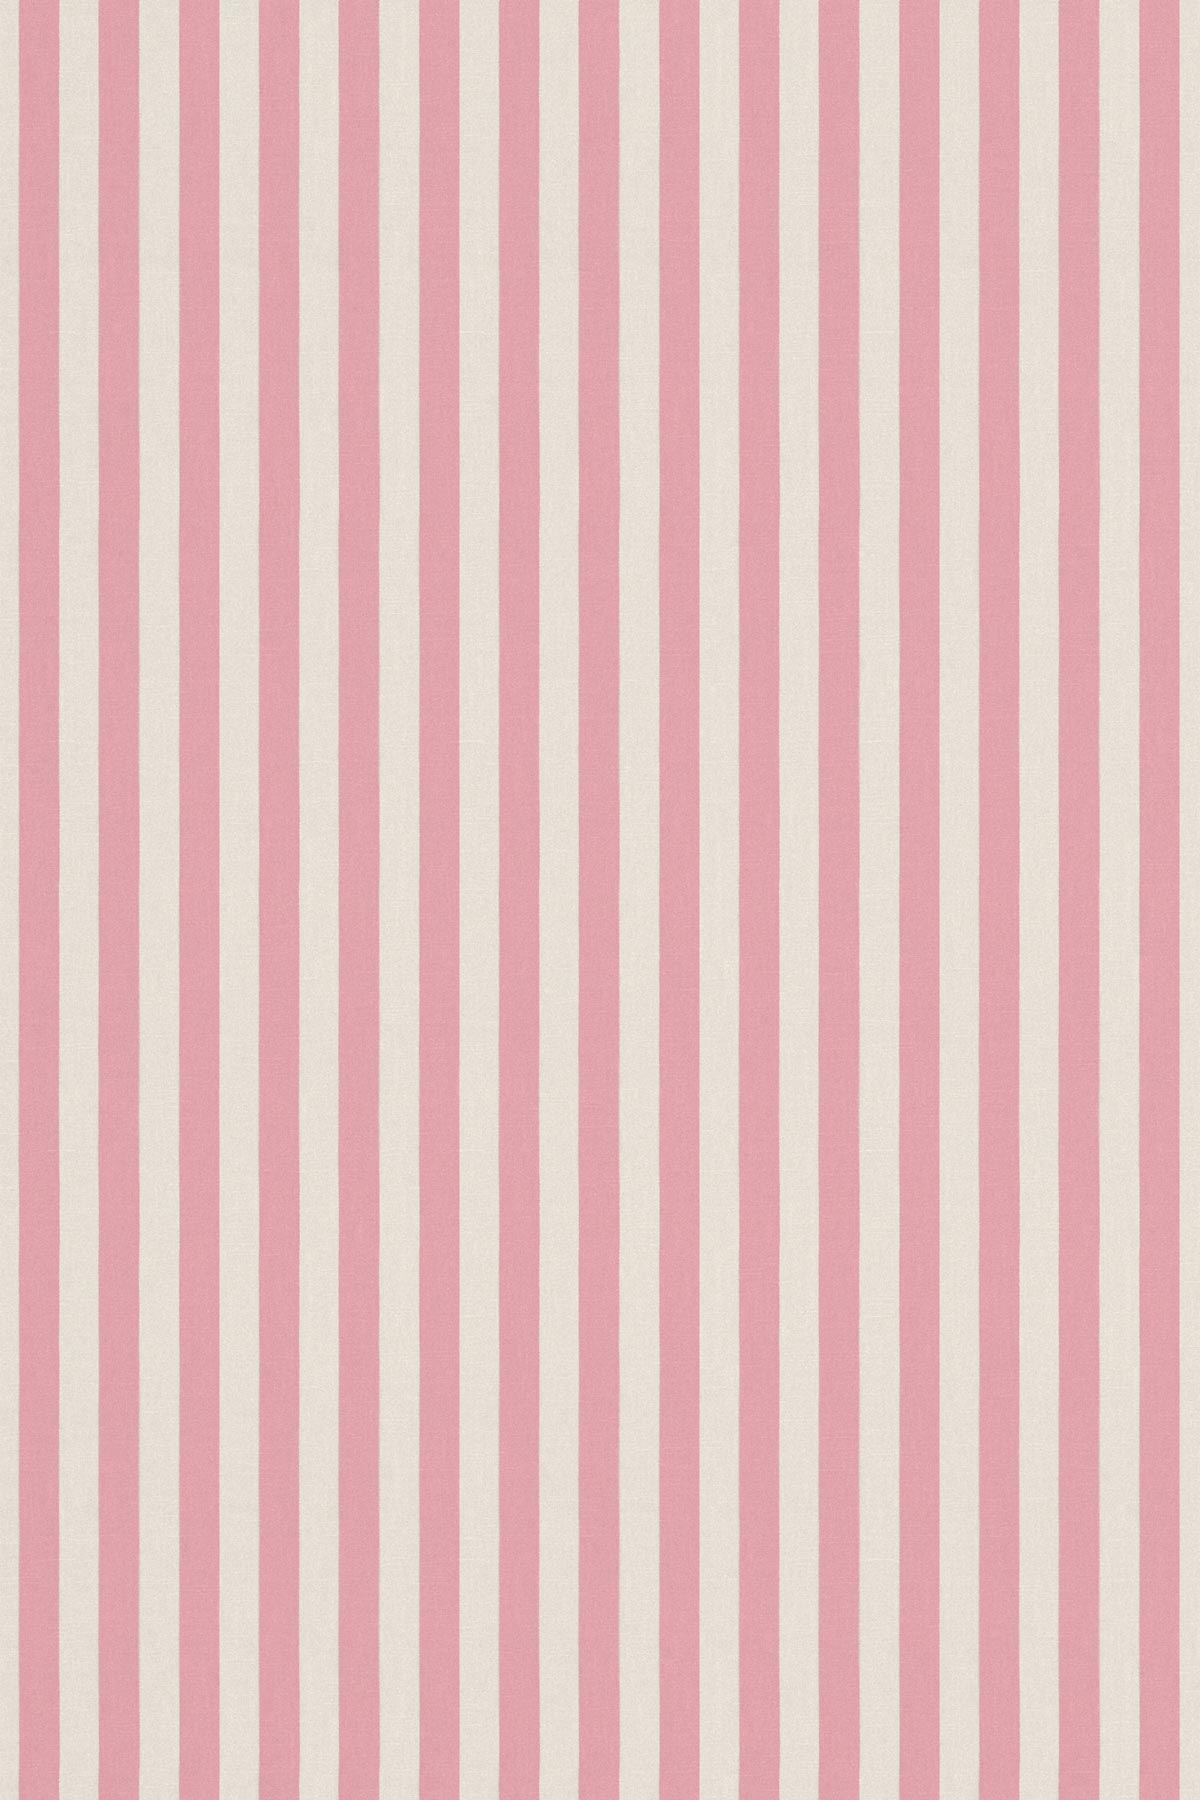 Carnival Stripe Fabric - Blossom - by Harlequin